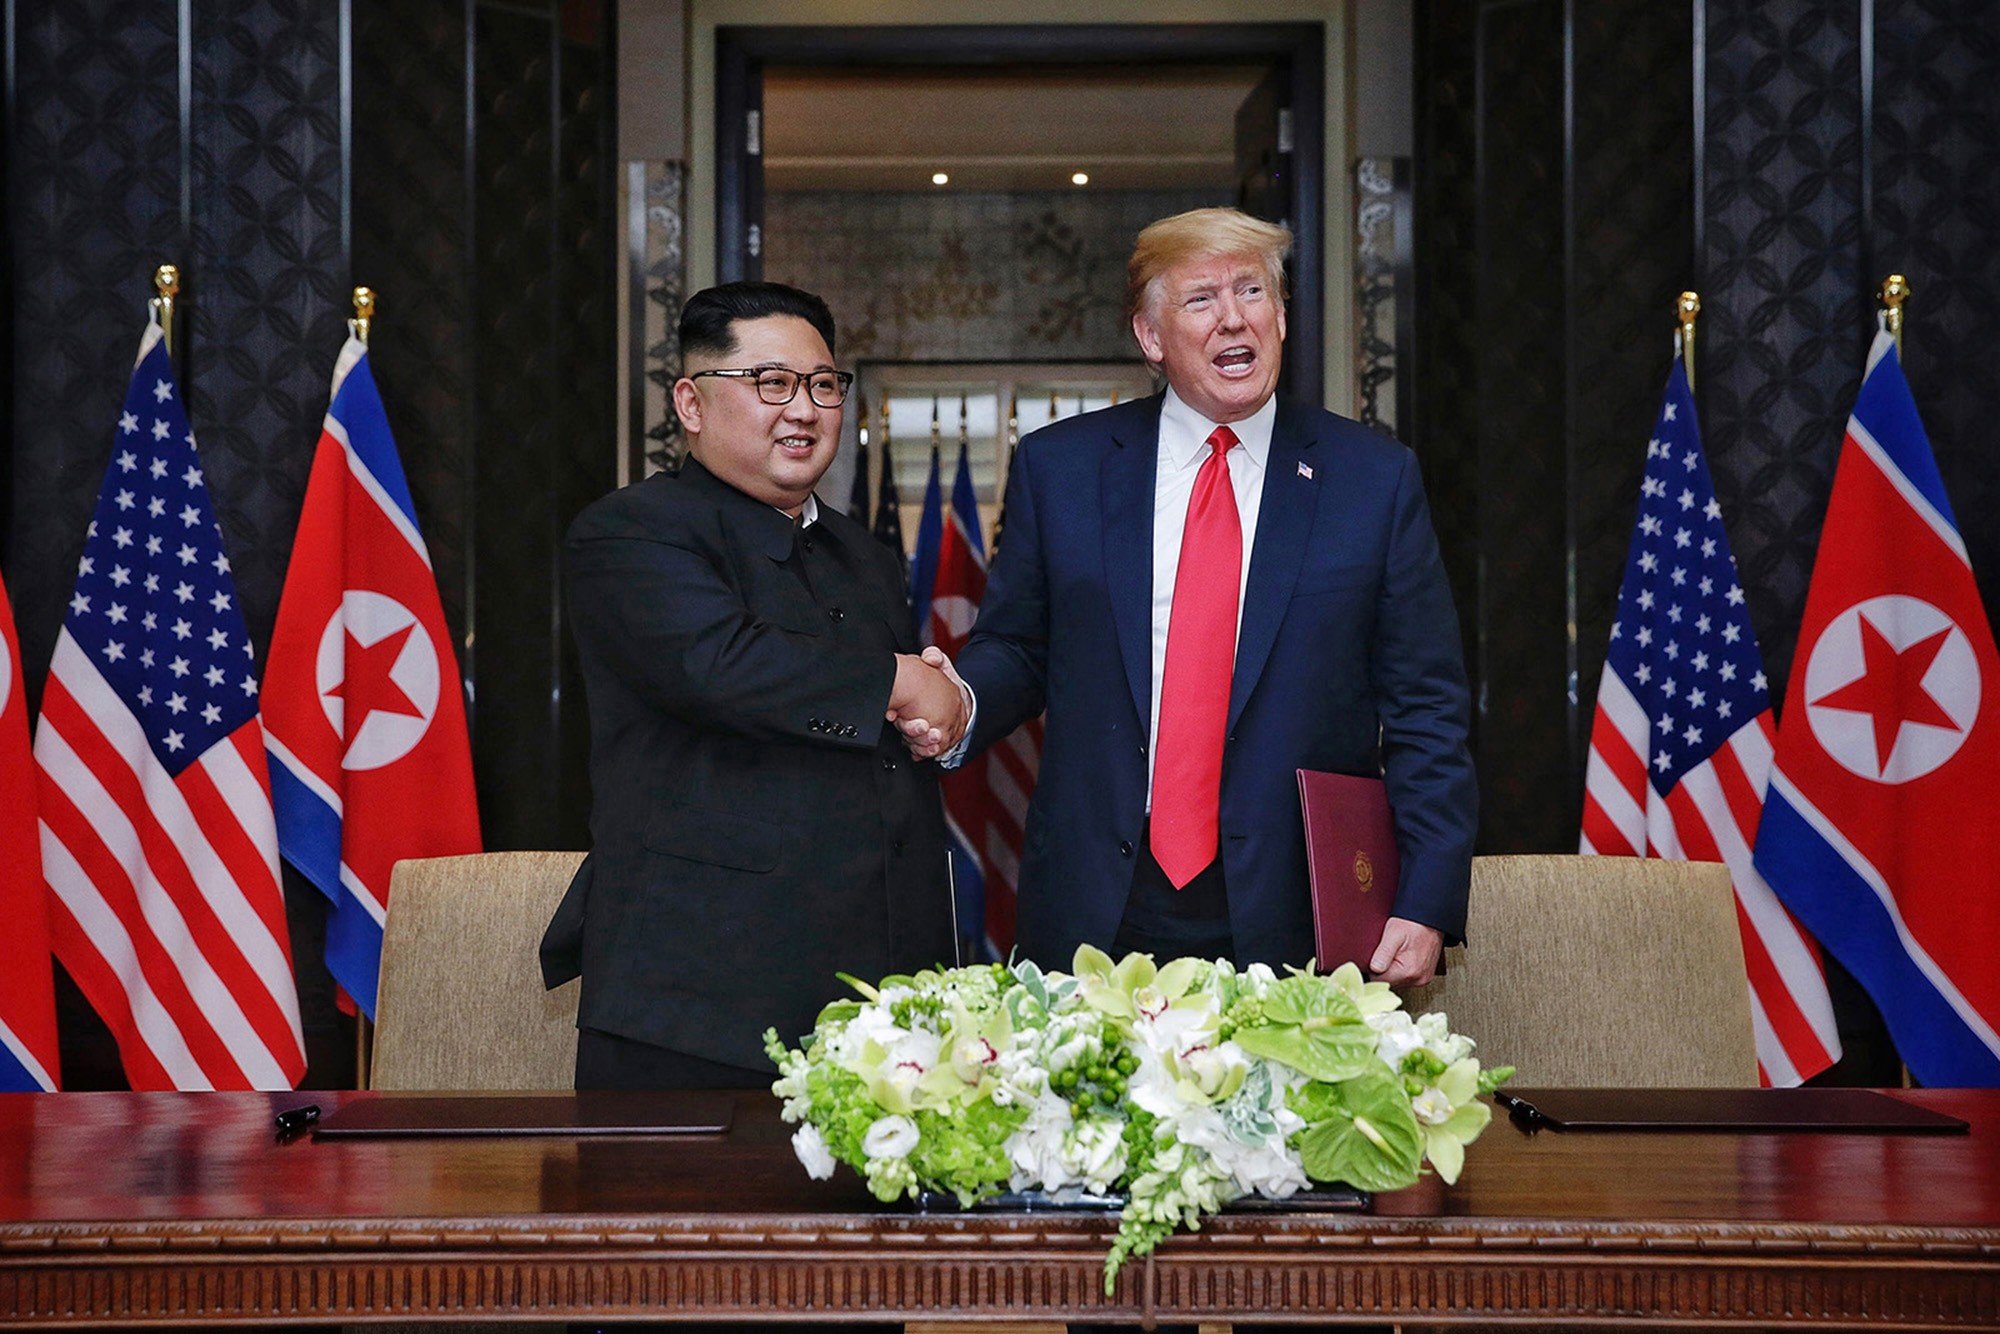 President Donald Trump and North Korean leader Kim Jong-un during their 2018 summit in Singapore. Photo: Ministry of Communications Singapore